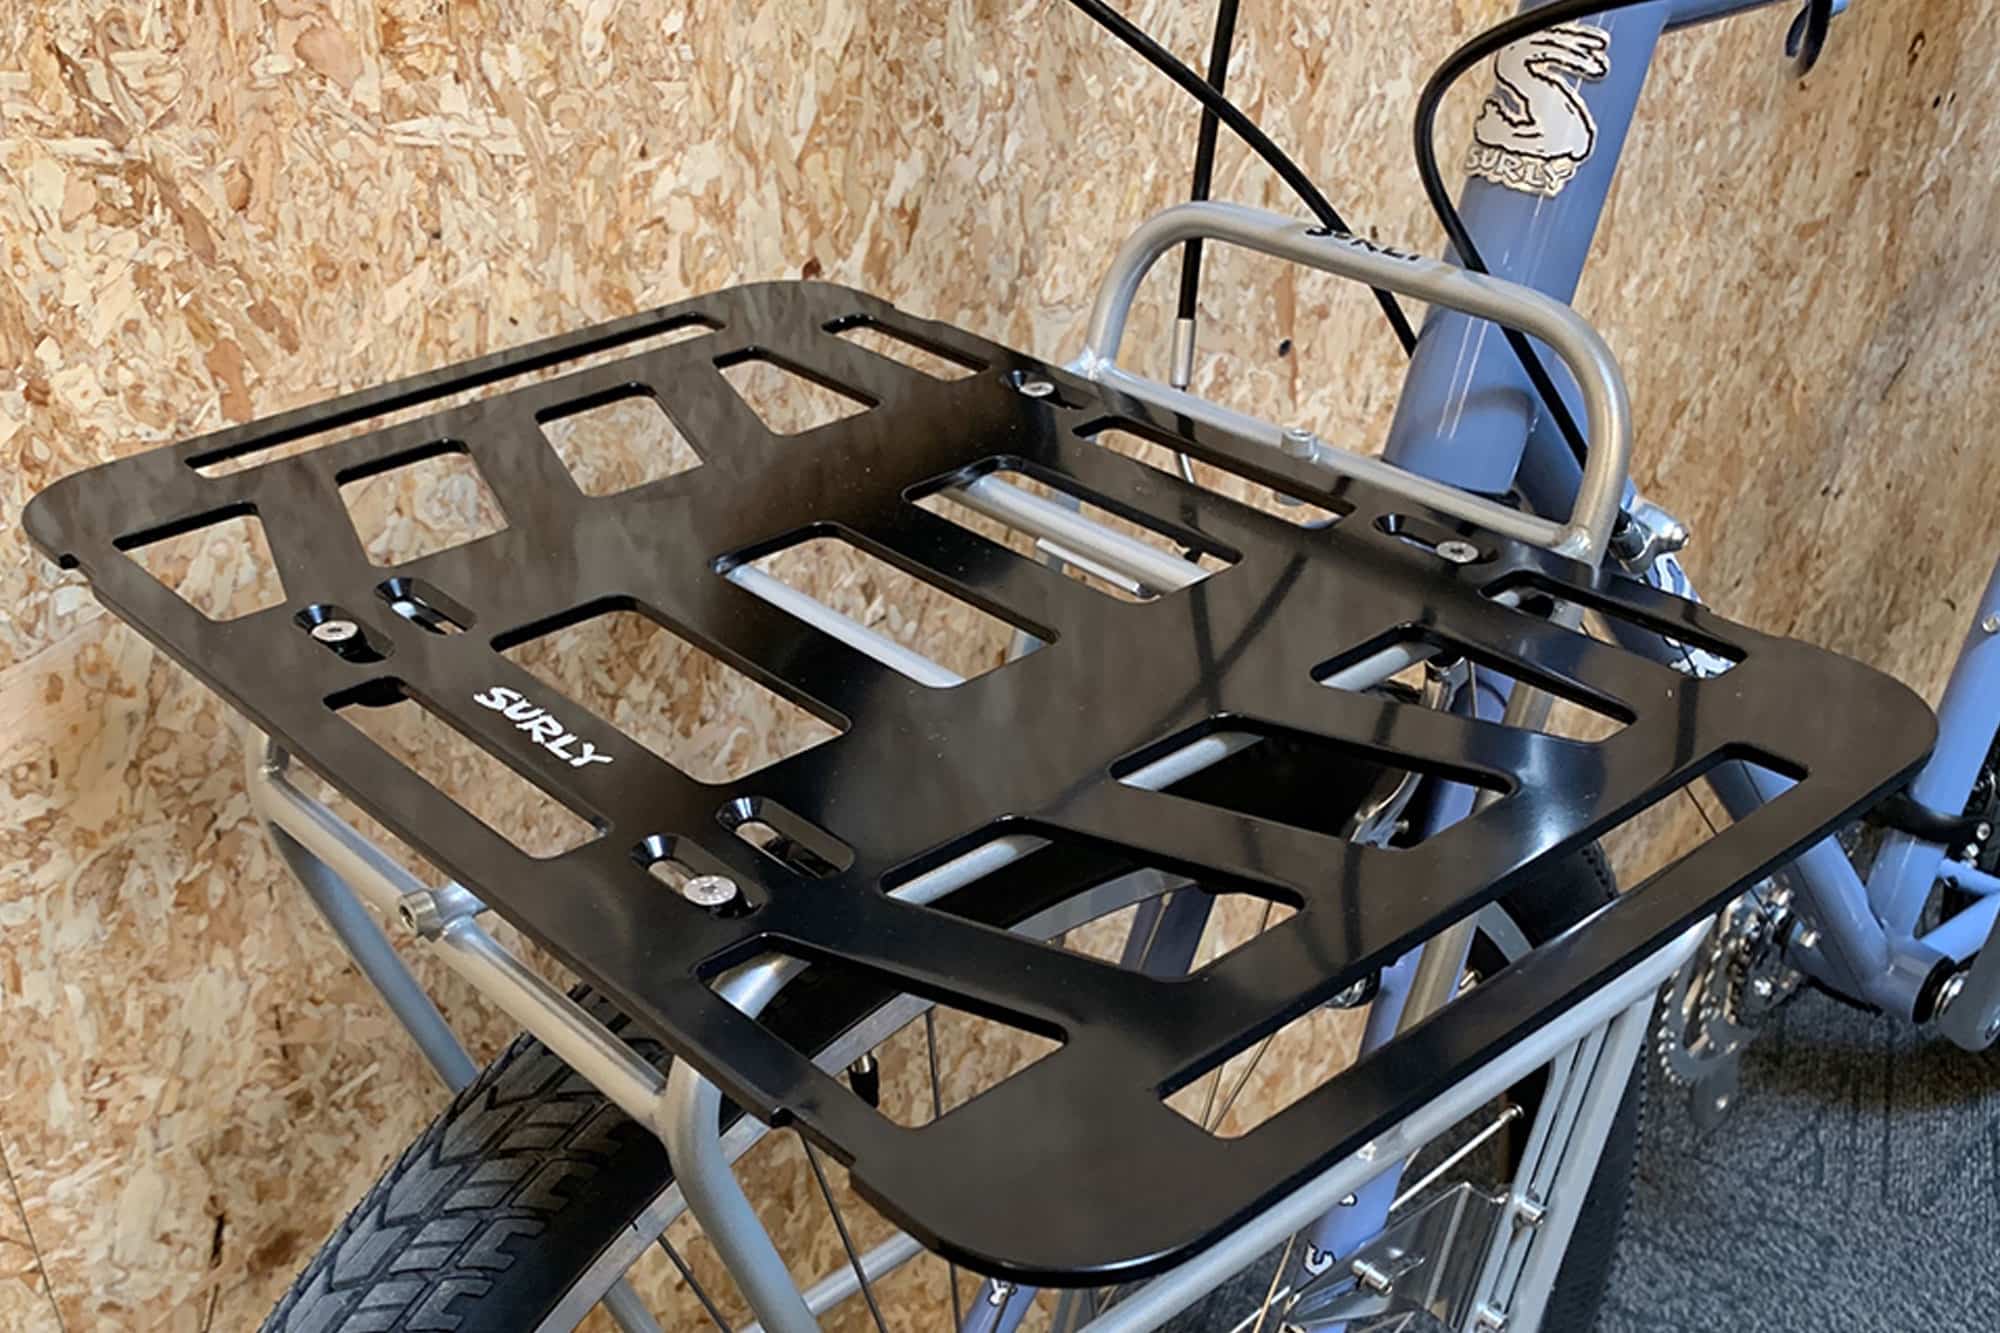 Surly TV Tray front rack, black, mounted to a Surly bike in front of an OSB wood wall